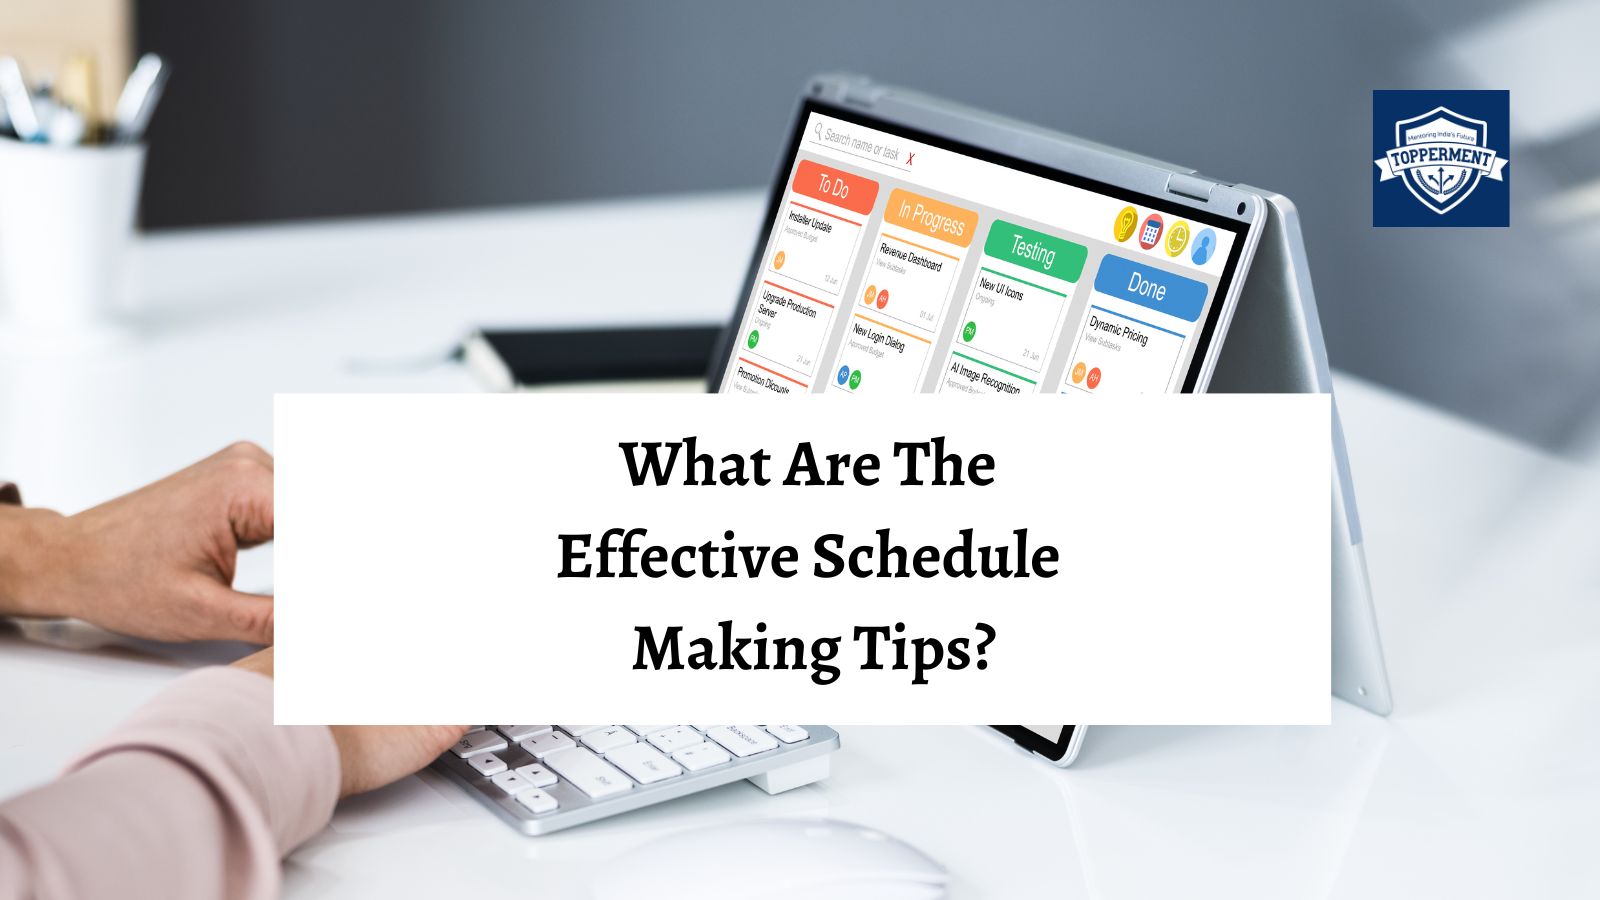 What Are The Effective Schedule-Making Tips For UPSC? | Best UPSC IAS Coaching For Mentorship And Guidance